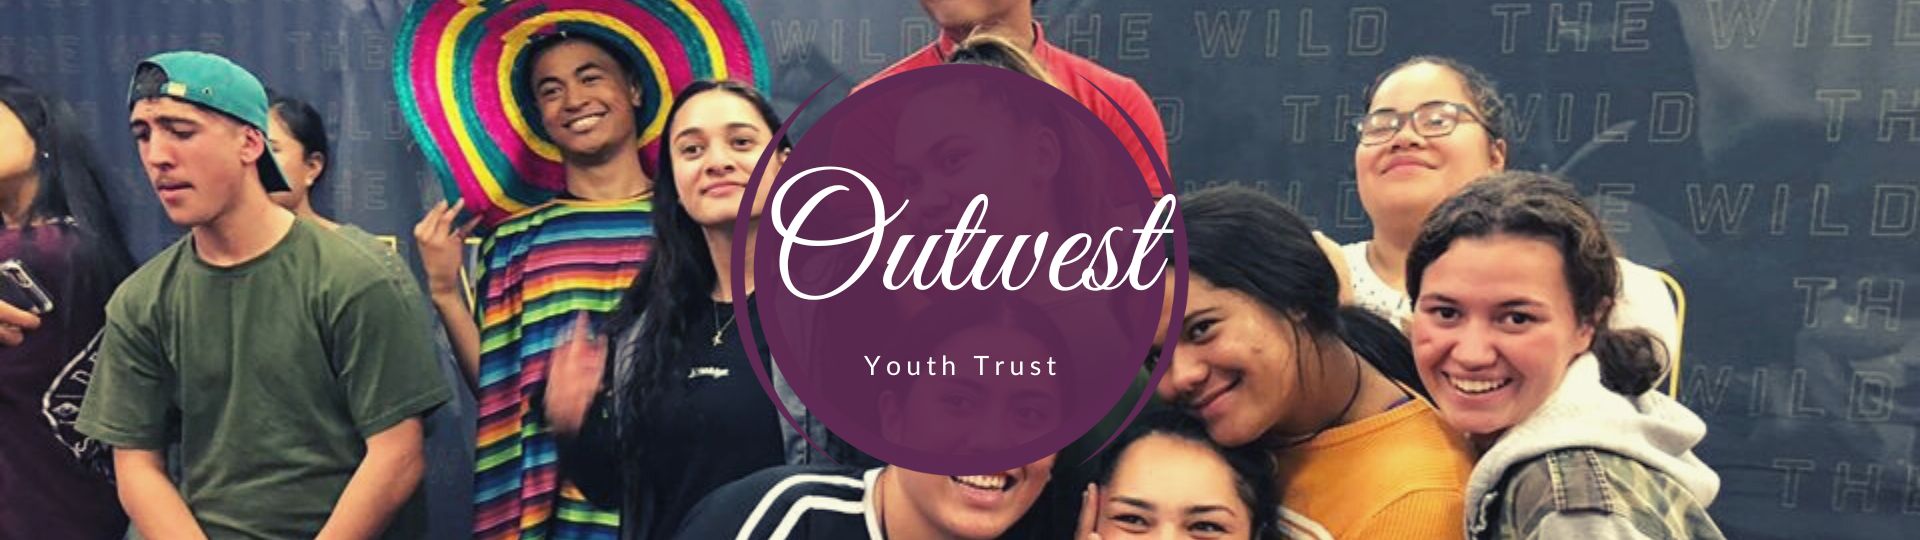 Outwest Youth Community Trust